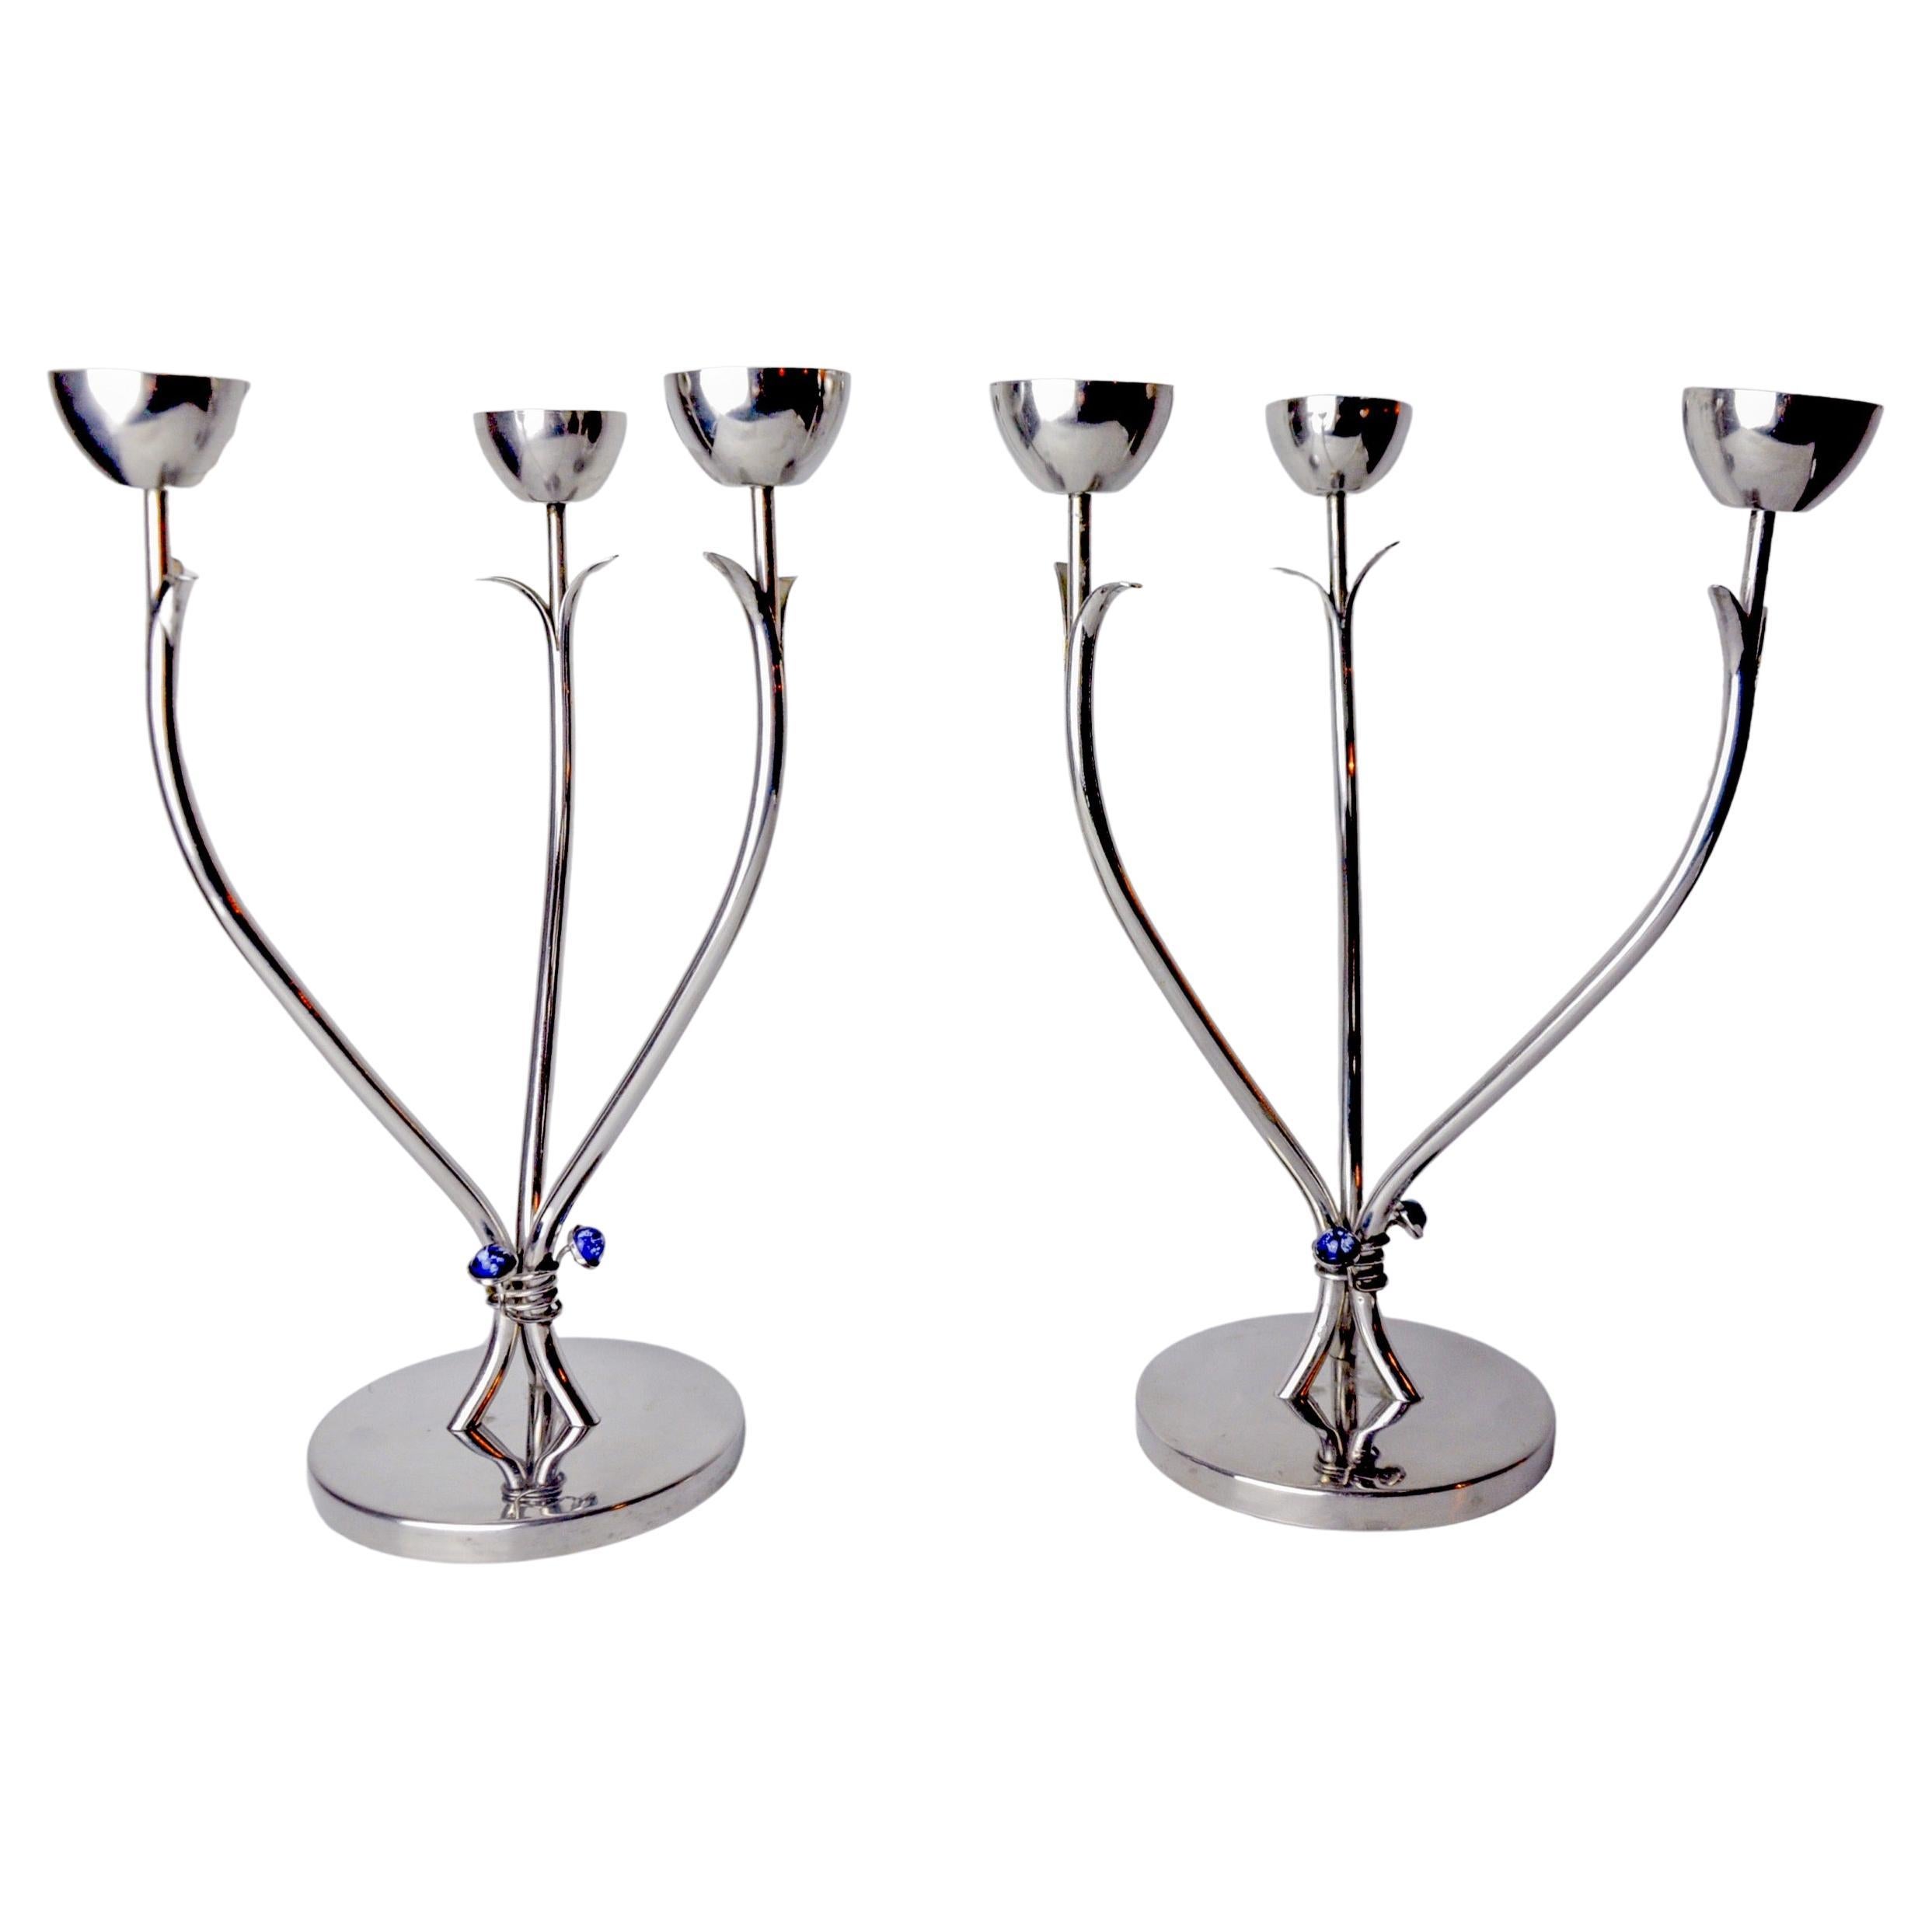 Pair of art deco stainless steel candlesticks with 3 flames and blue